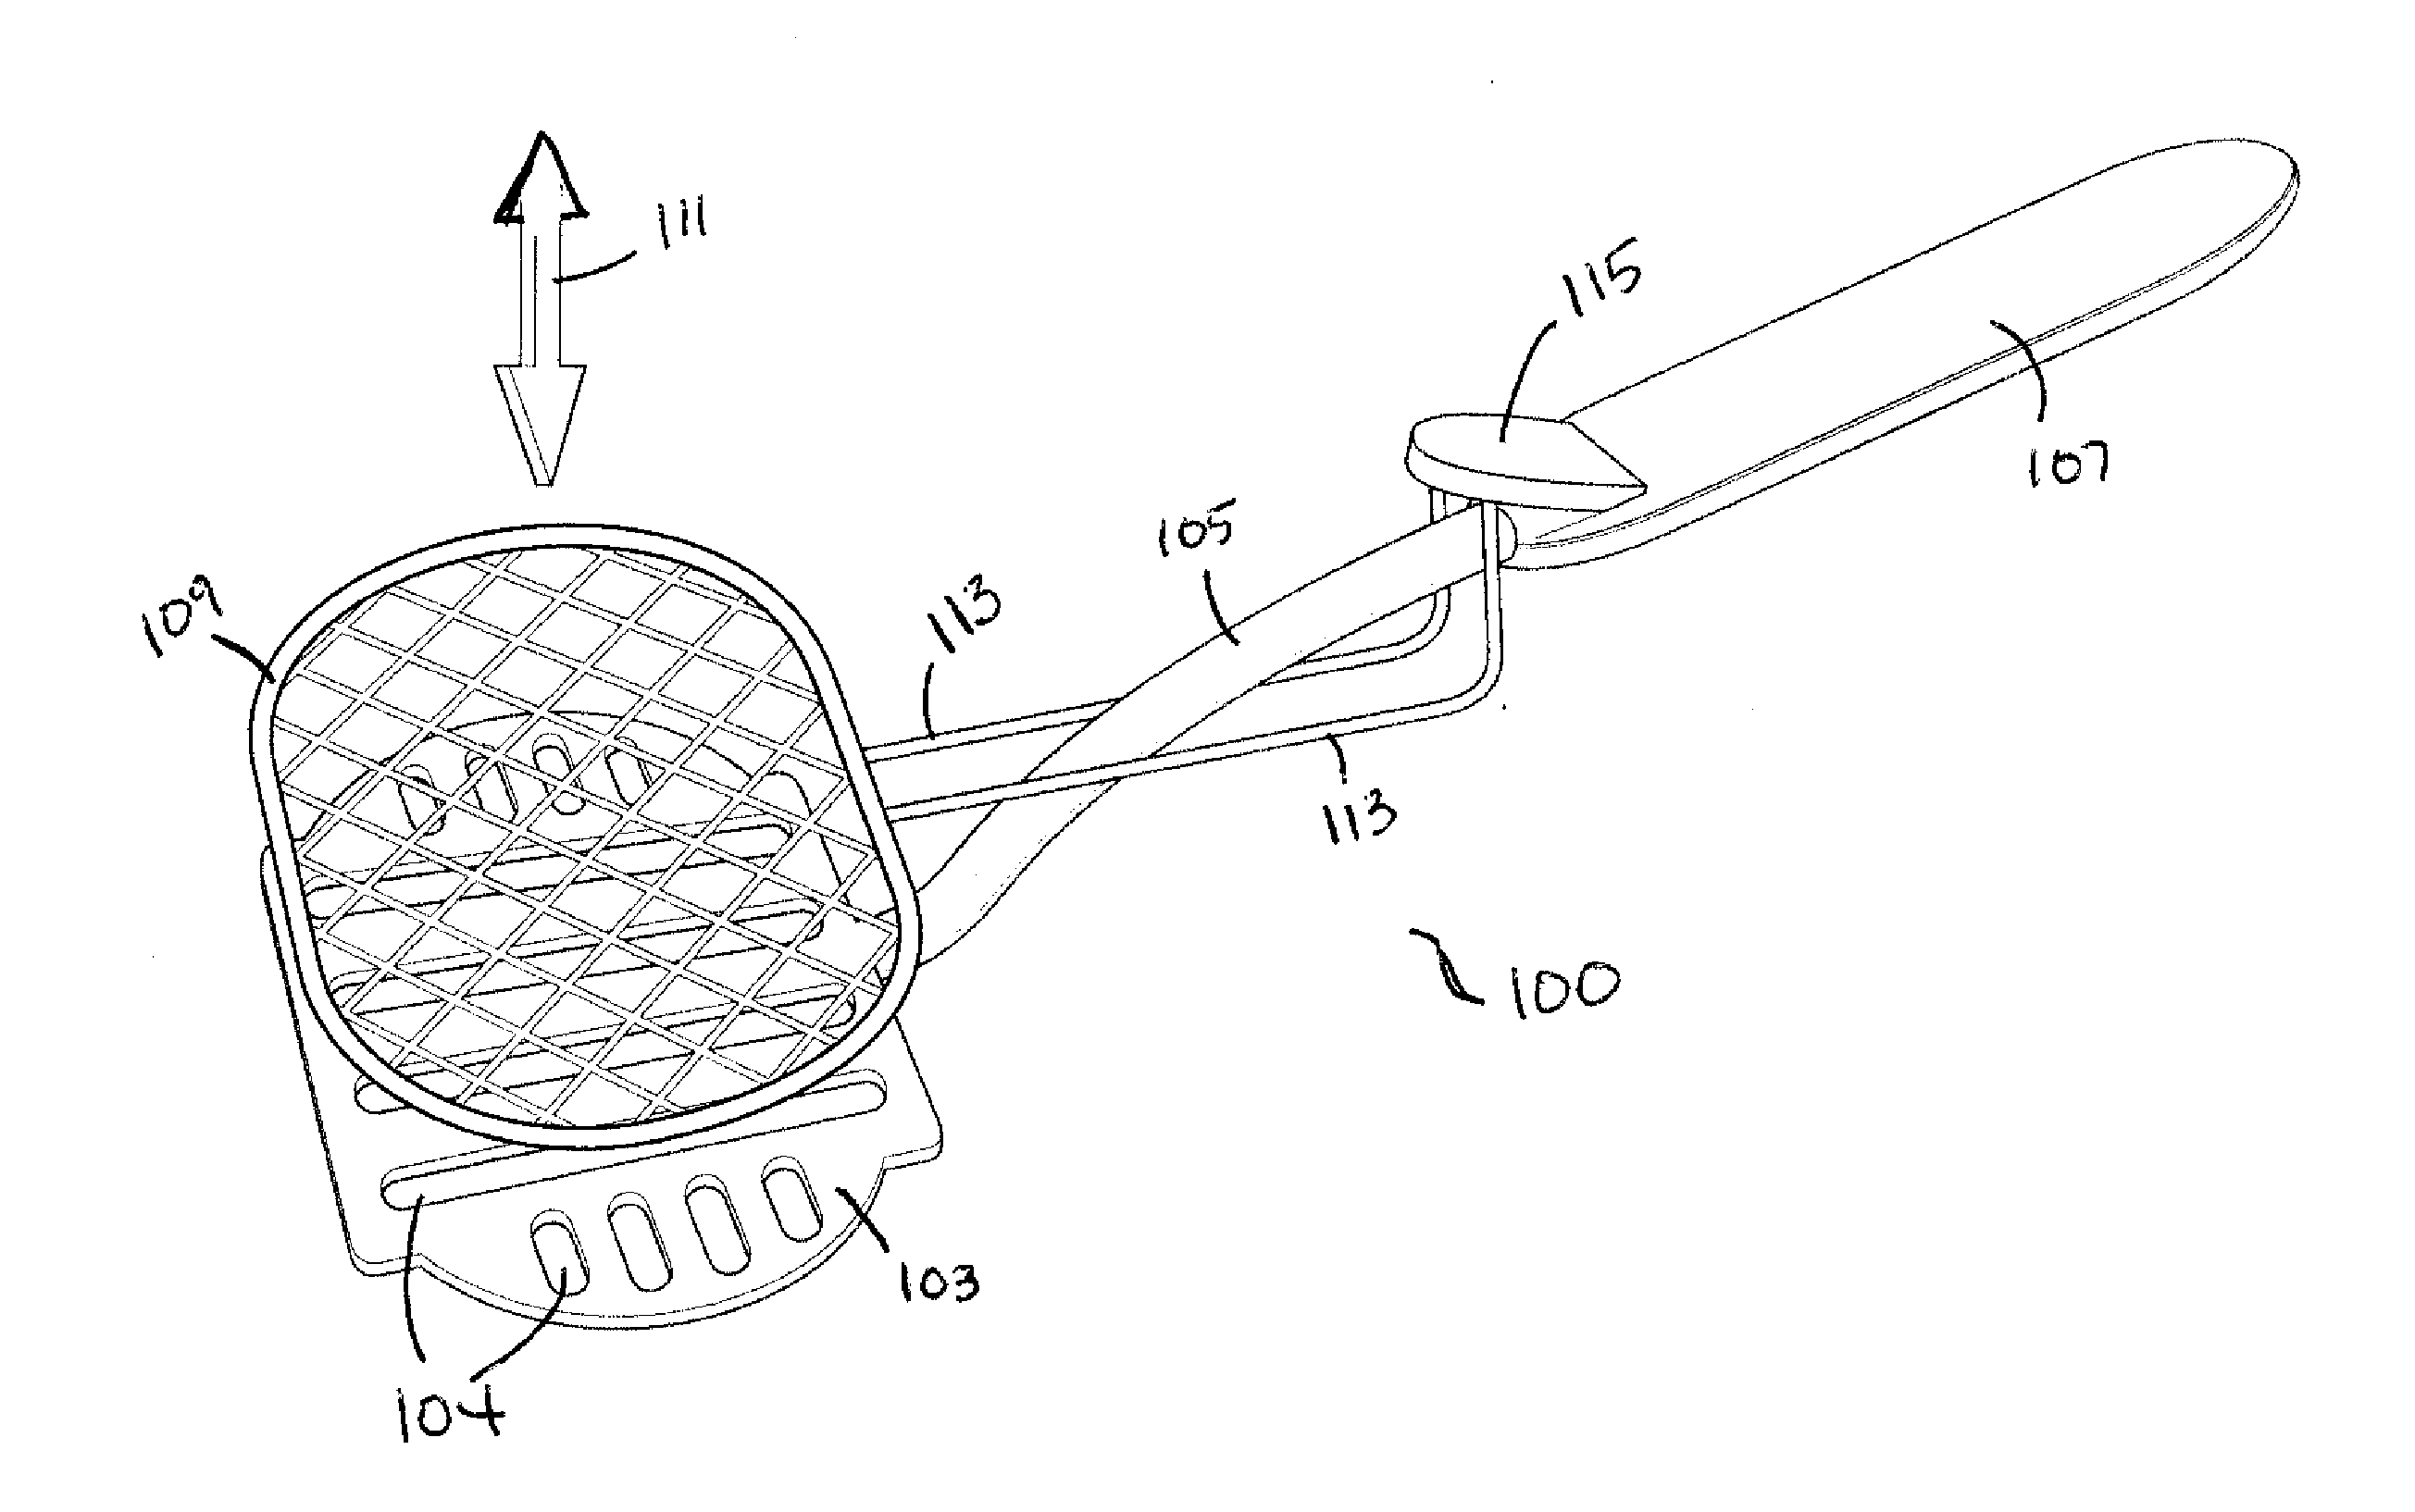 Apparatus for Draining Excess Fluids from Food